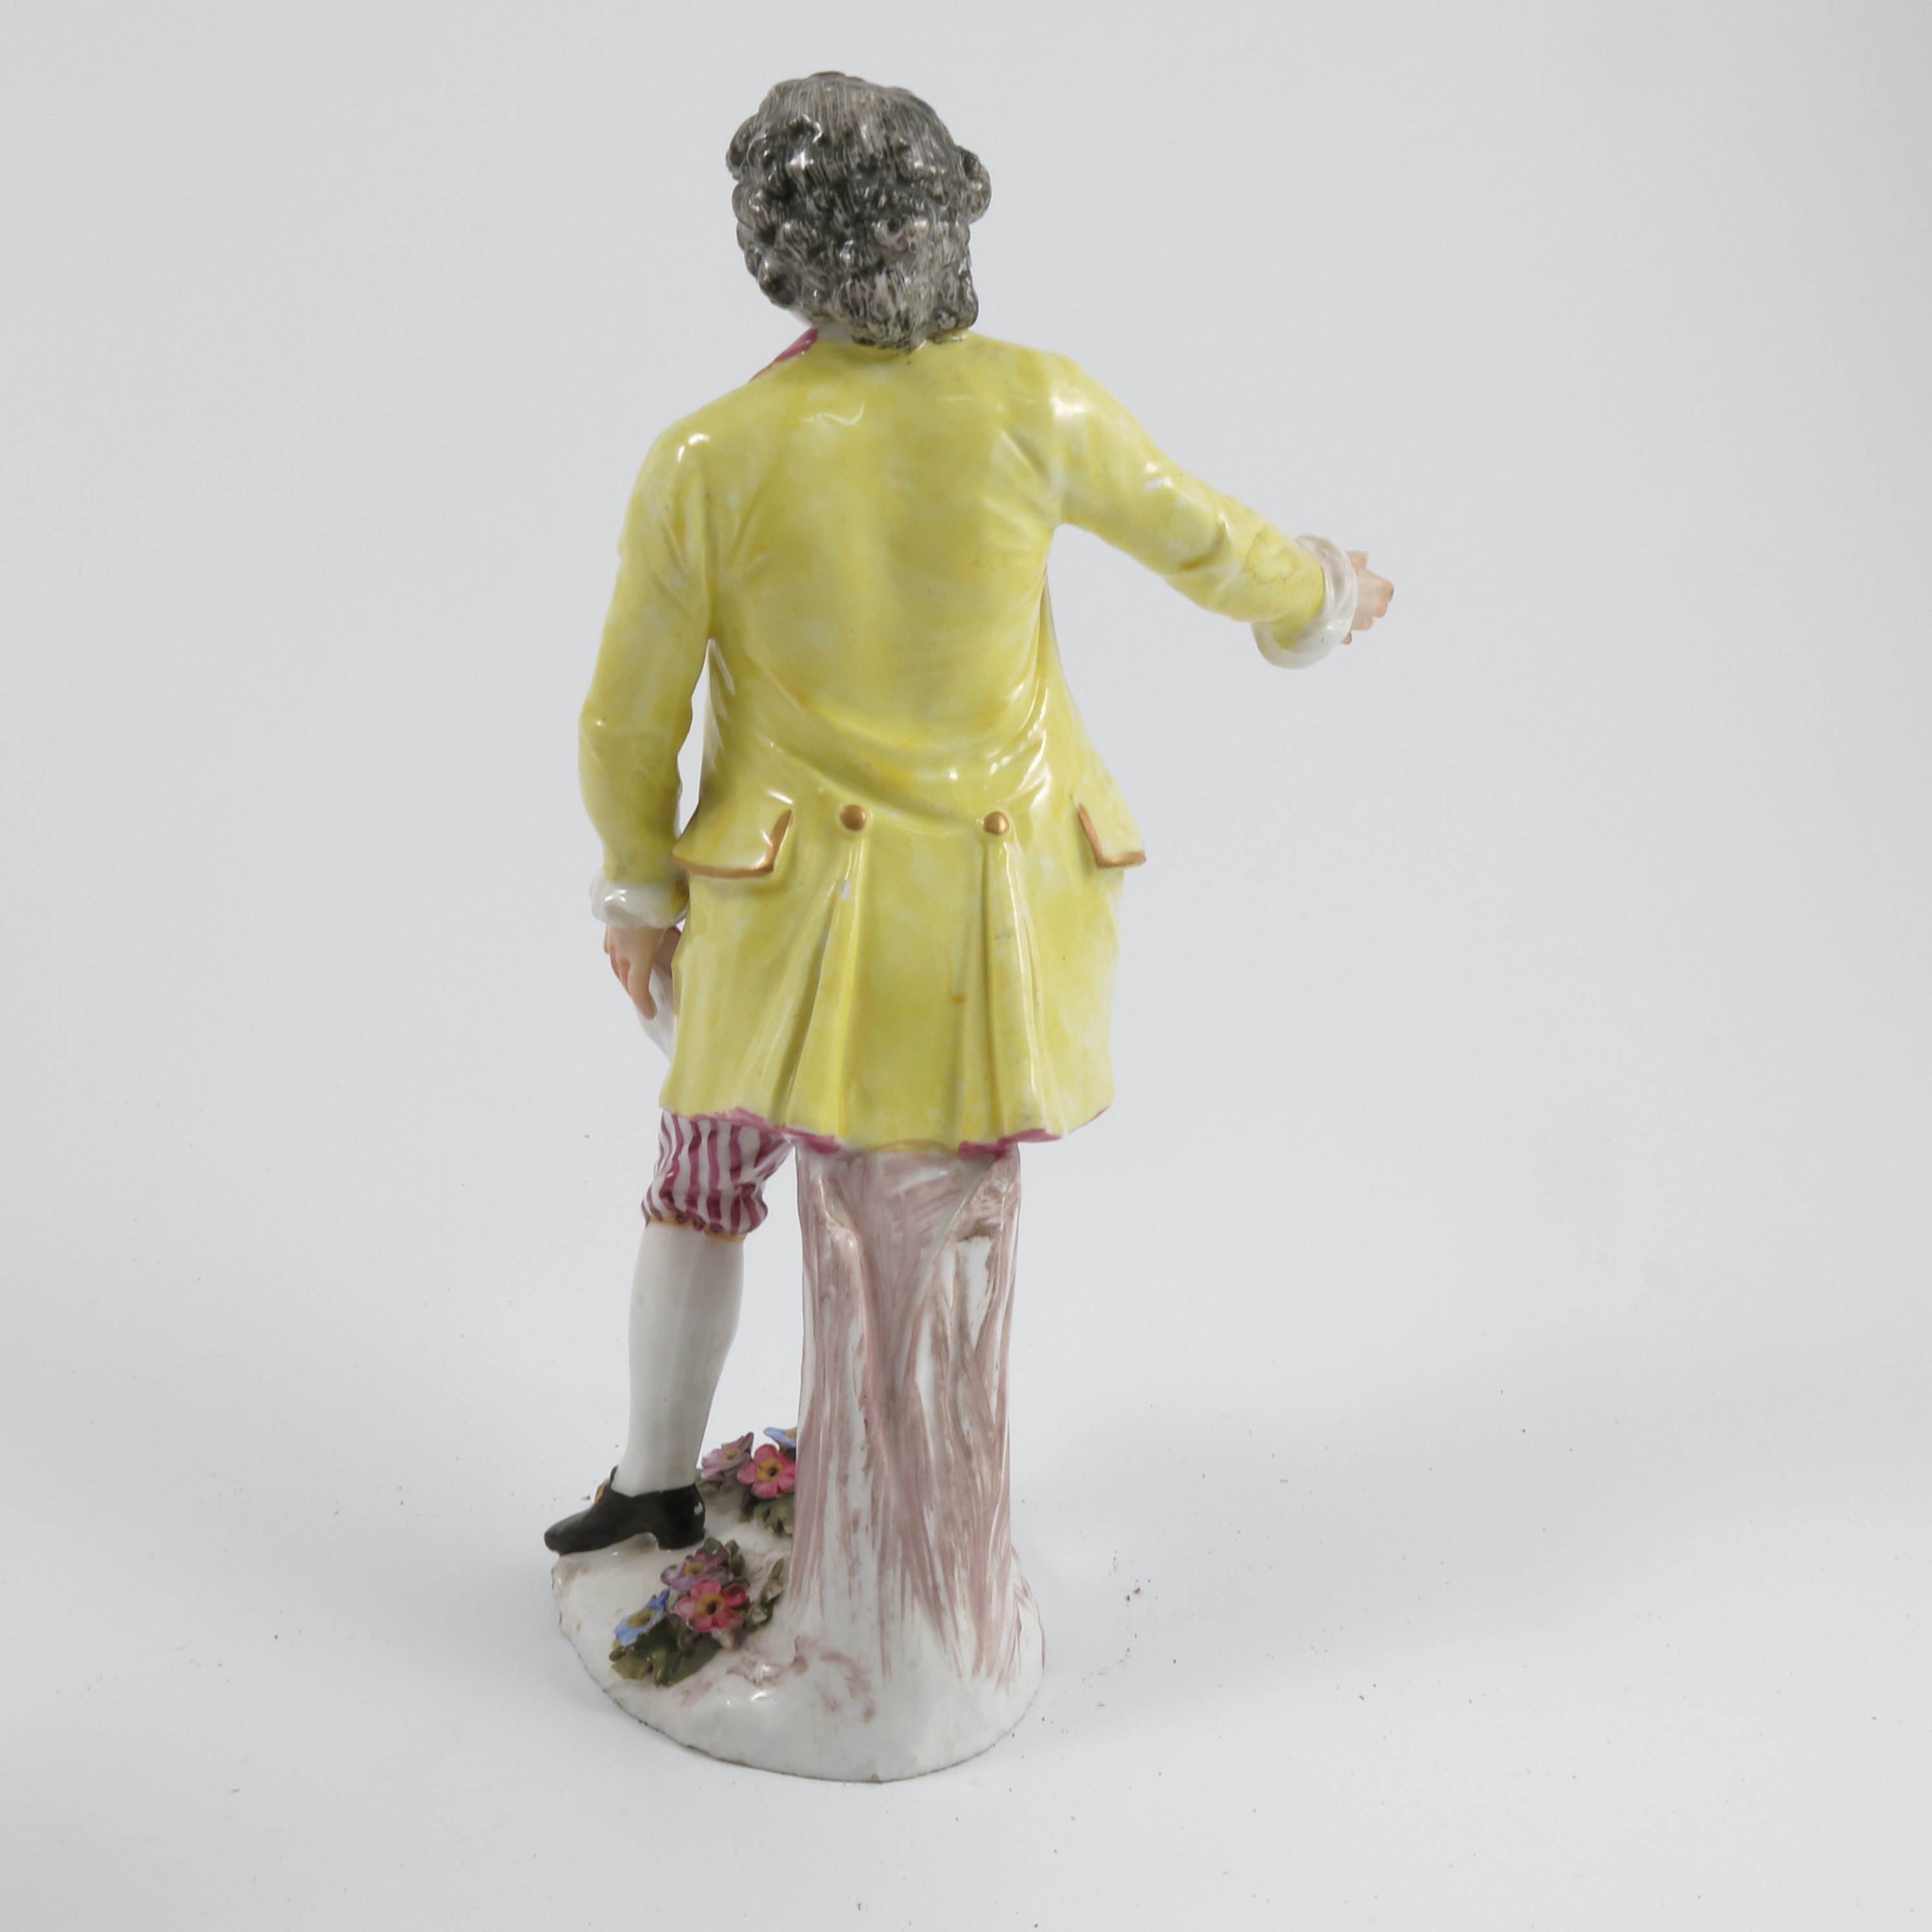 A pair of late 19th century continental porcelain figures, of a man wearing a yellow jacket and a - Image 8 of 9